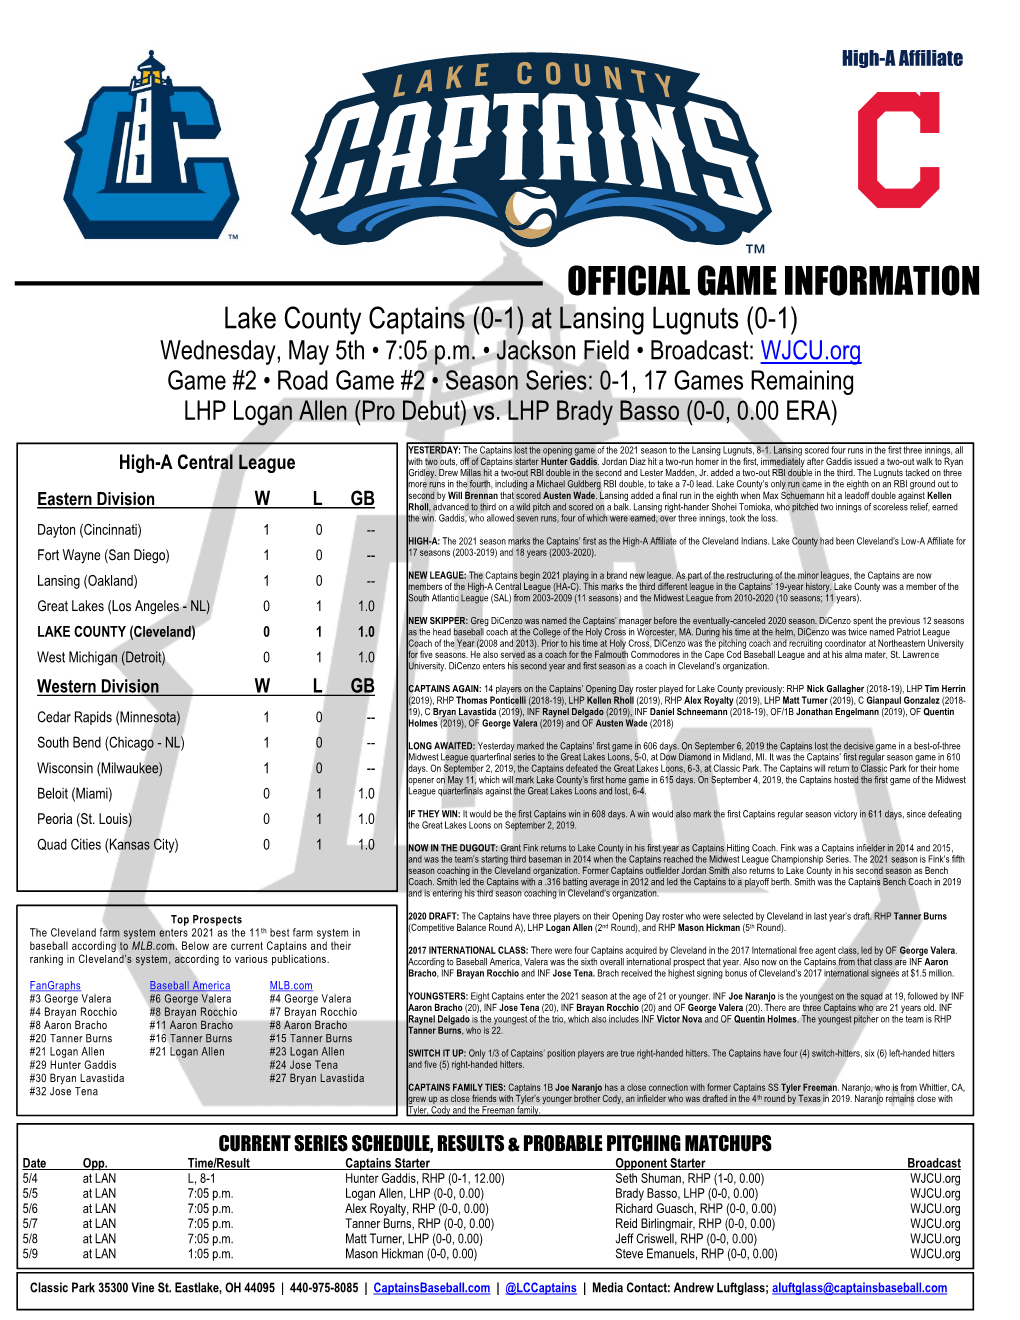 OFFICIAL GAME INFORMATION Lake County Captains (0-1) at Lansing Lugnuts (0-1) Wednesday, May 5Th • 7:05 P.M